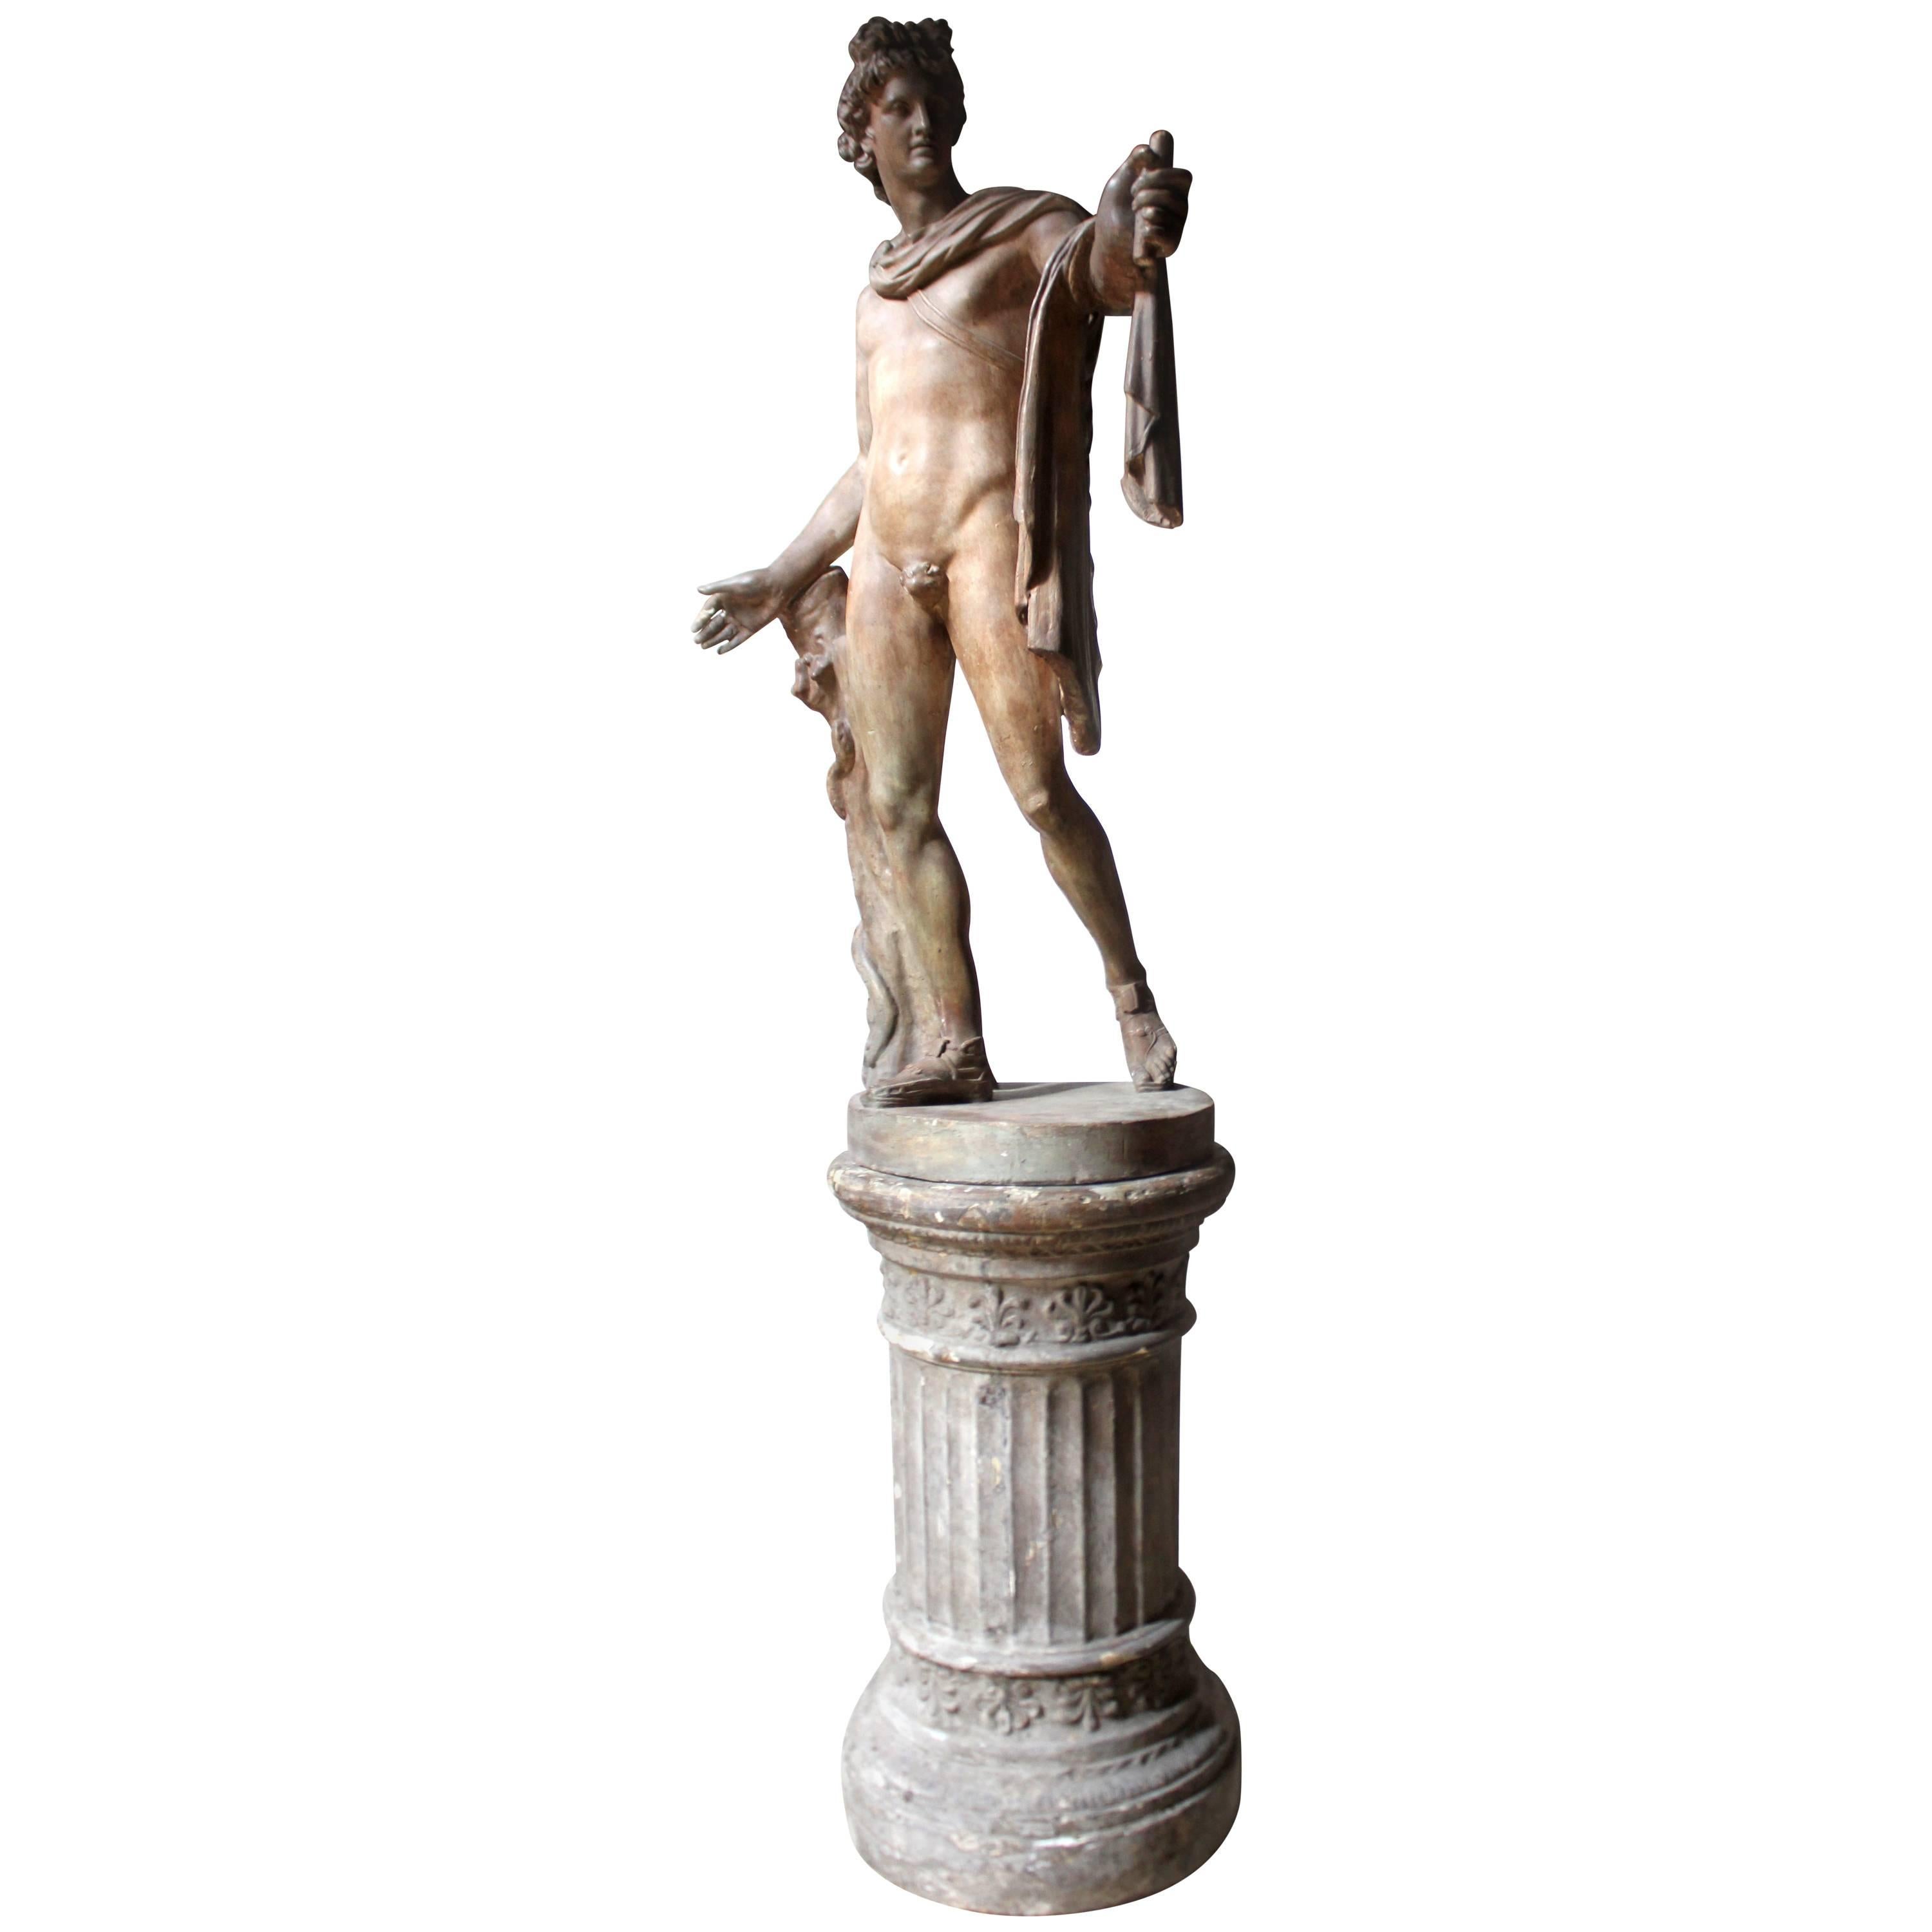 Plaster Figure of the Apollo Belvedere on Plinth Cast by Brucciani under the V&A